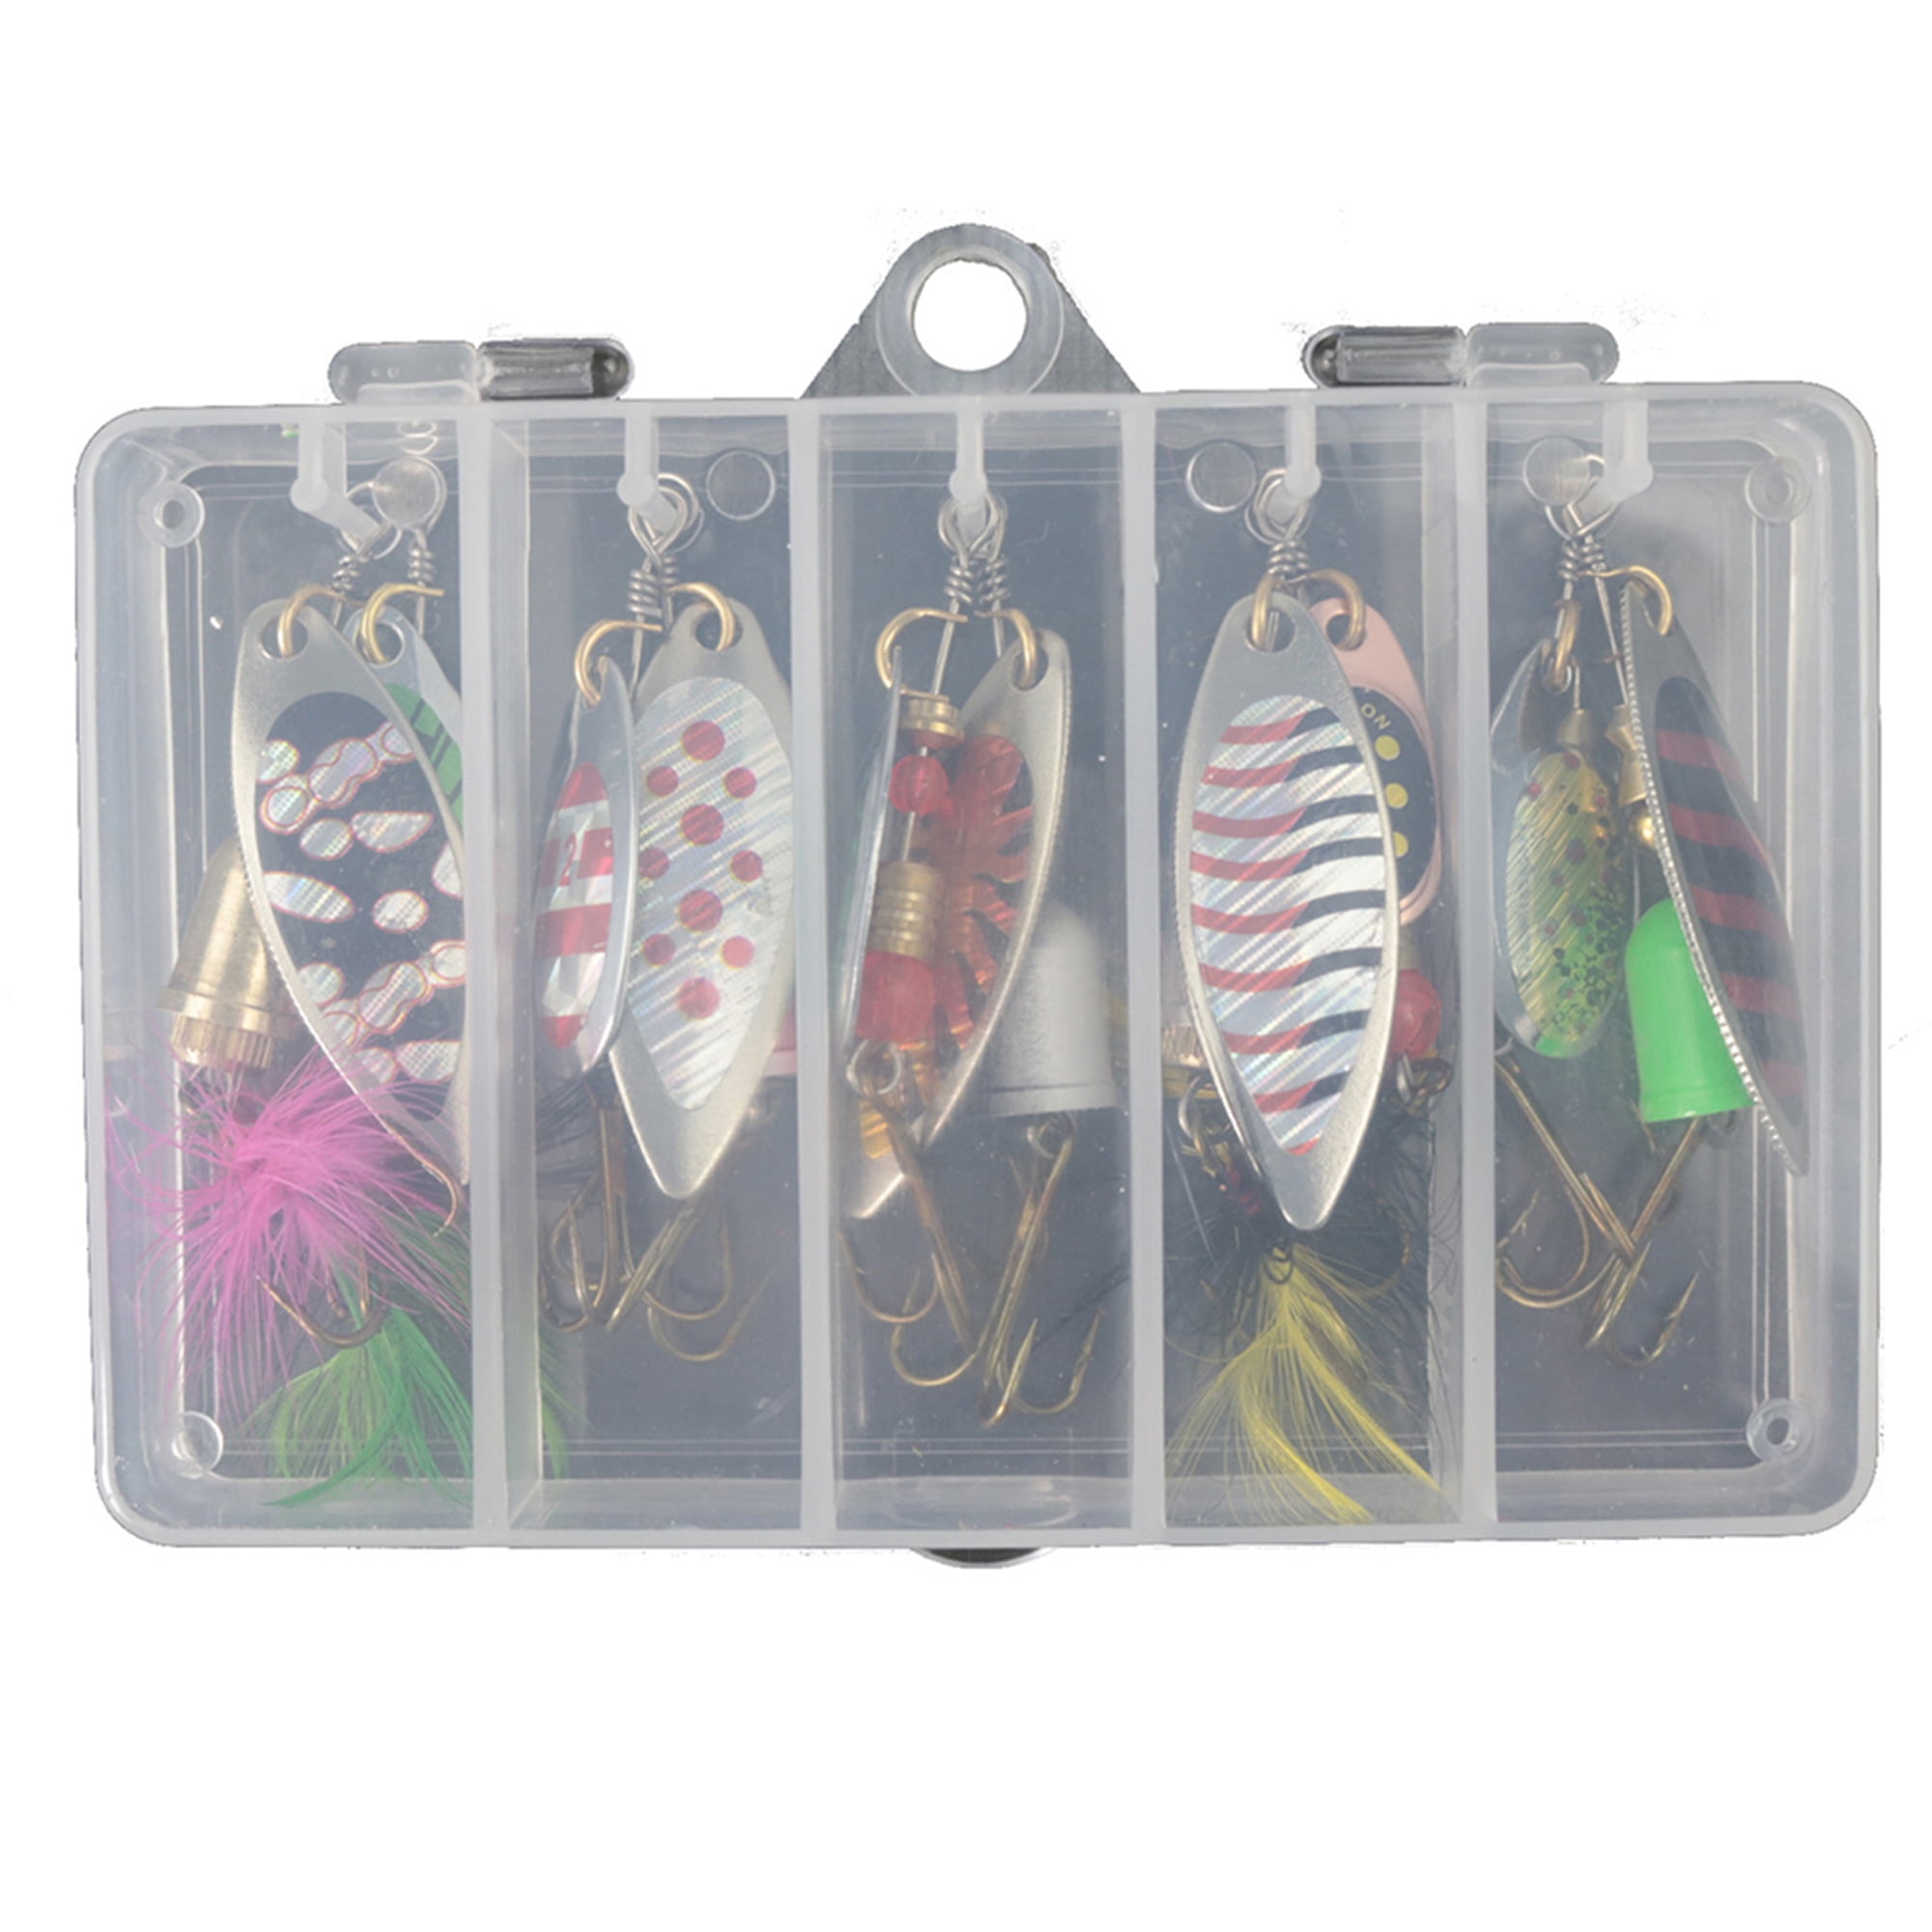 10pcs Fishing Lures Spinnerbaits Bass Trout Salmon Hard Metal Spinner baits  Box - AbuMaizar Dental Roots Clinic